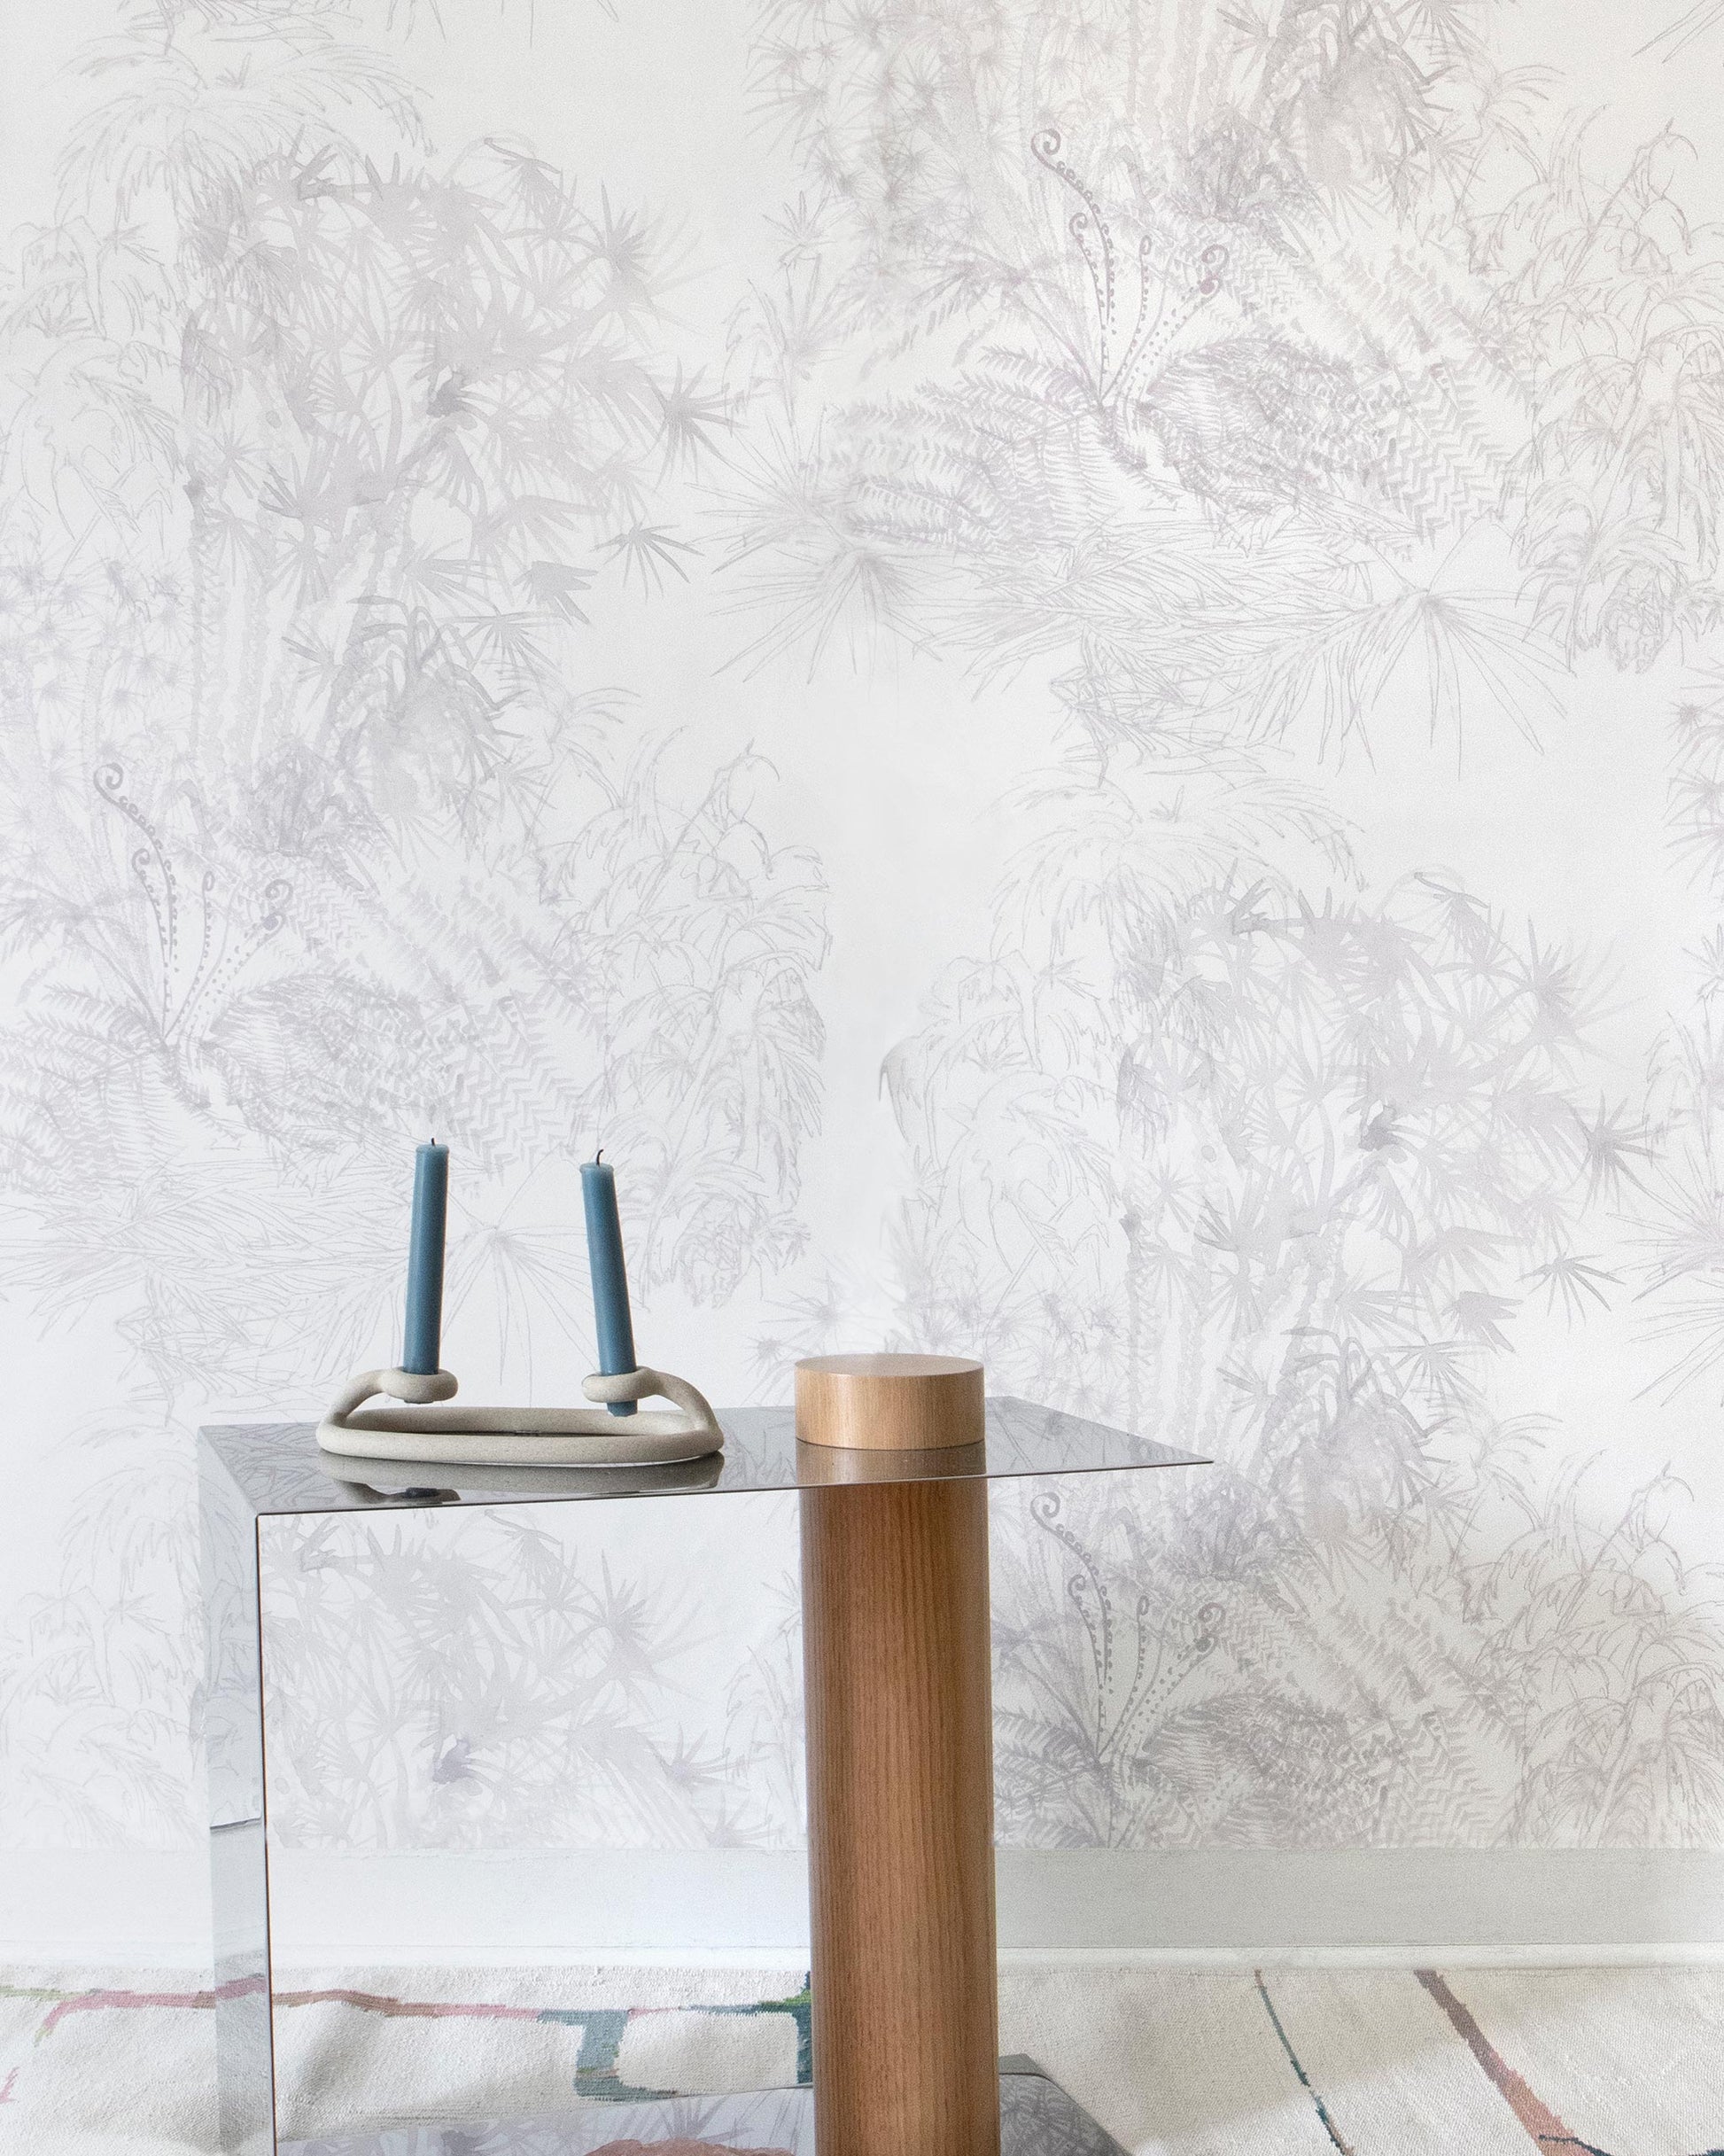 A table with a vase and a lamp in front of a white wall from the Domenica Wallpaper Lumier Collection